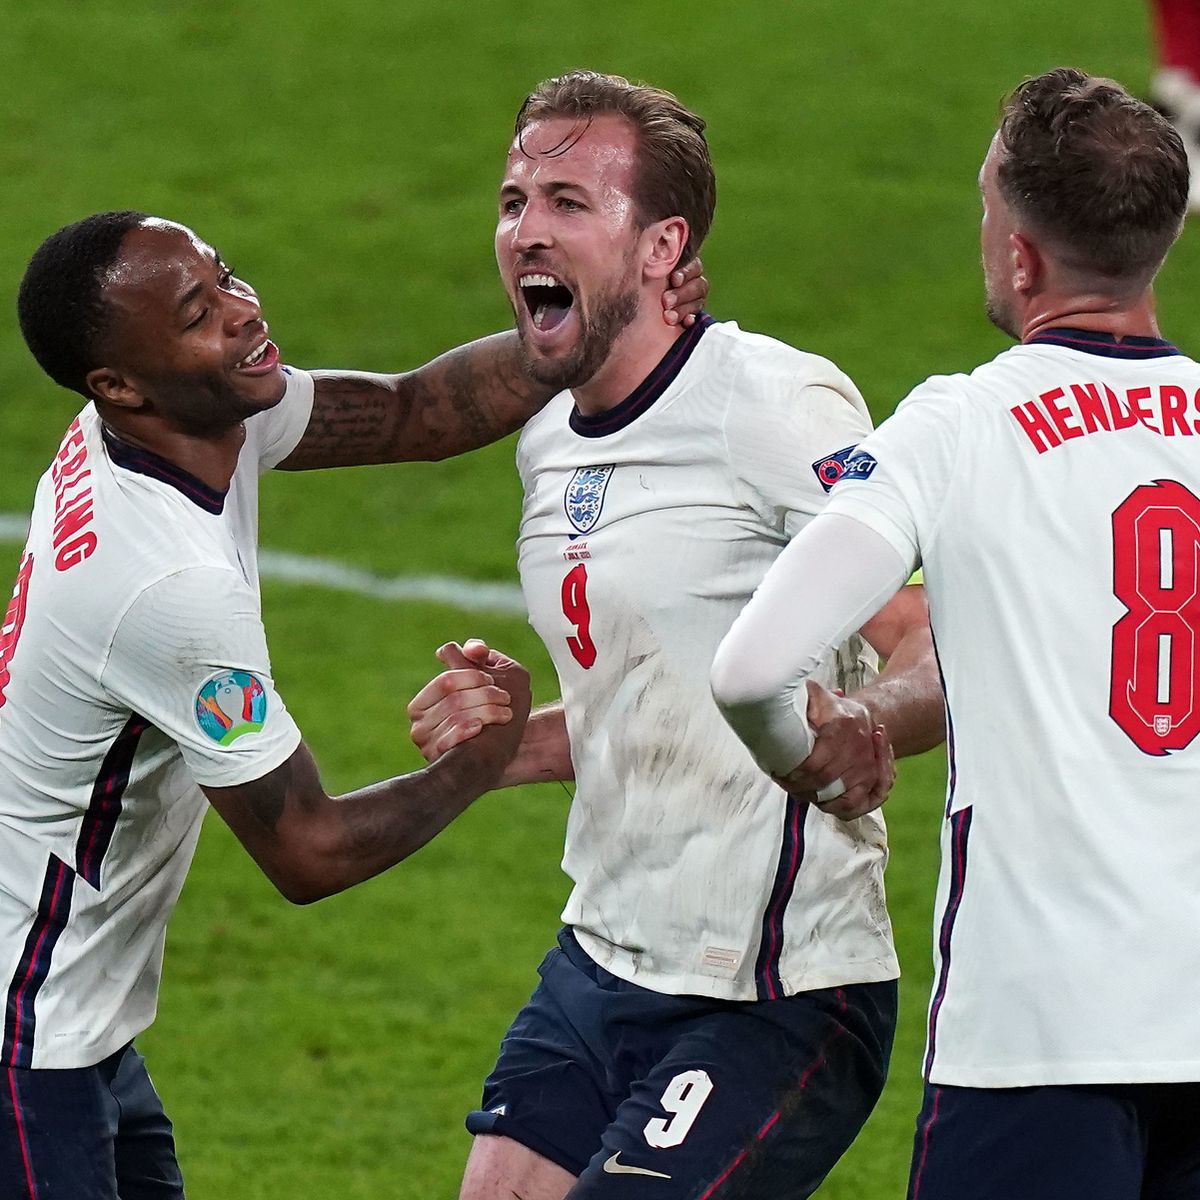 England is the world’s third best team, ahead of World Cup and Euro winners France and Italy.